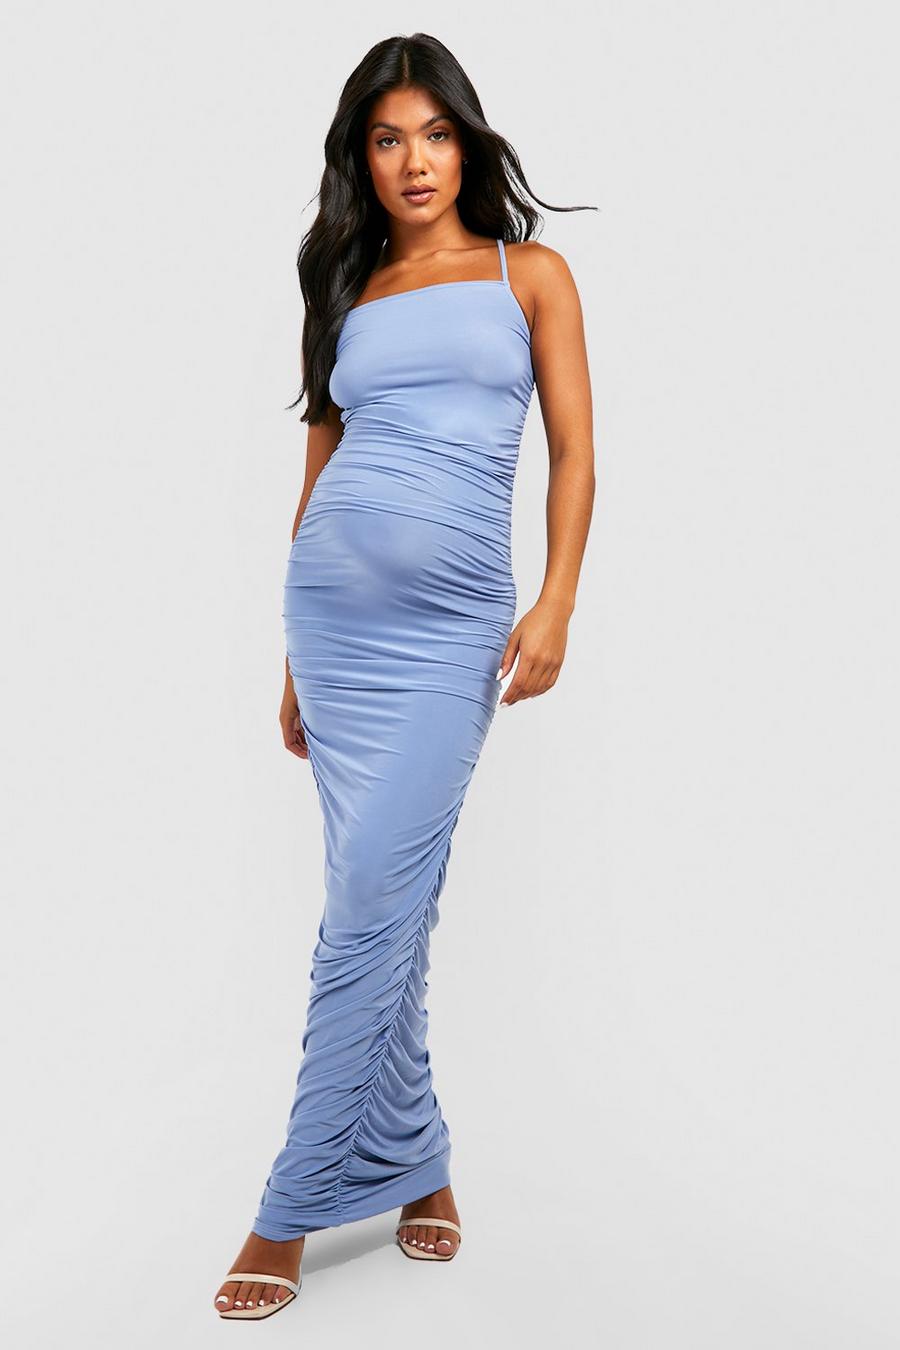 Sky blue Maternity Ruched Strappy Slinky Maxi Dress